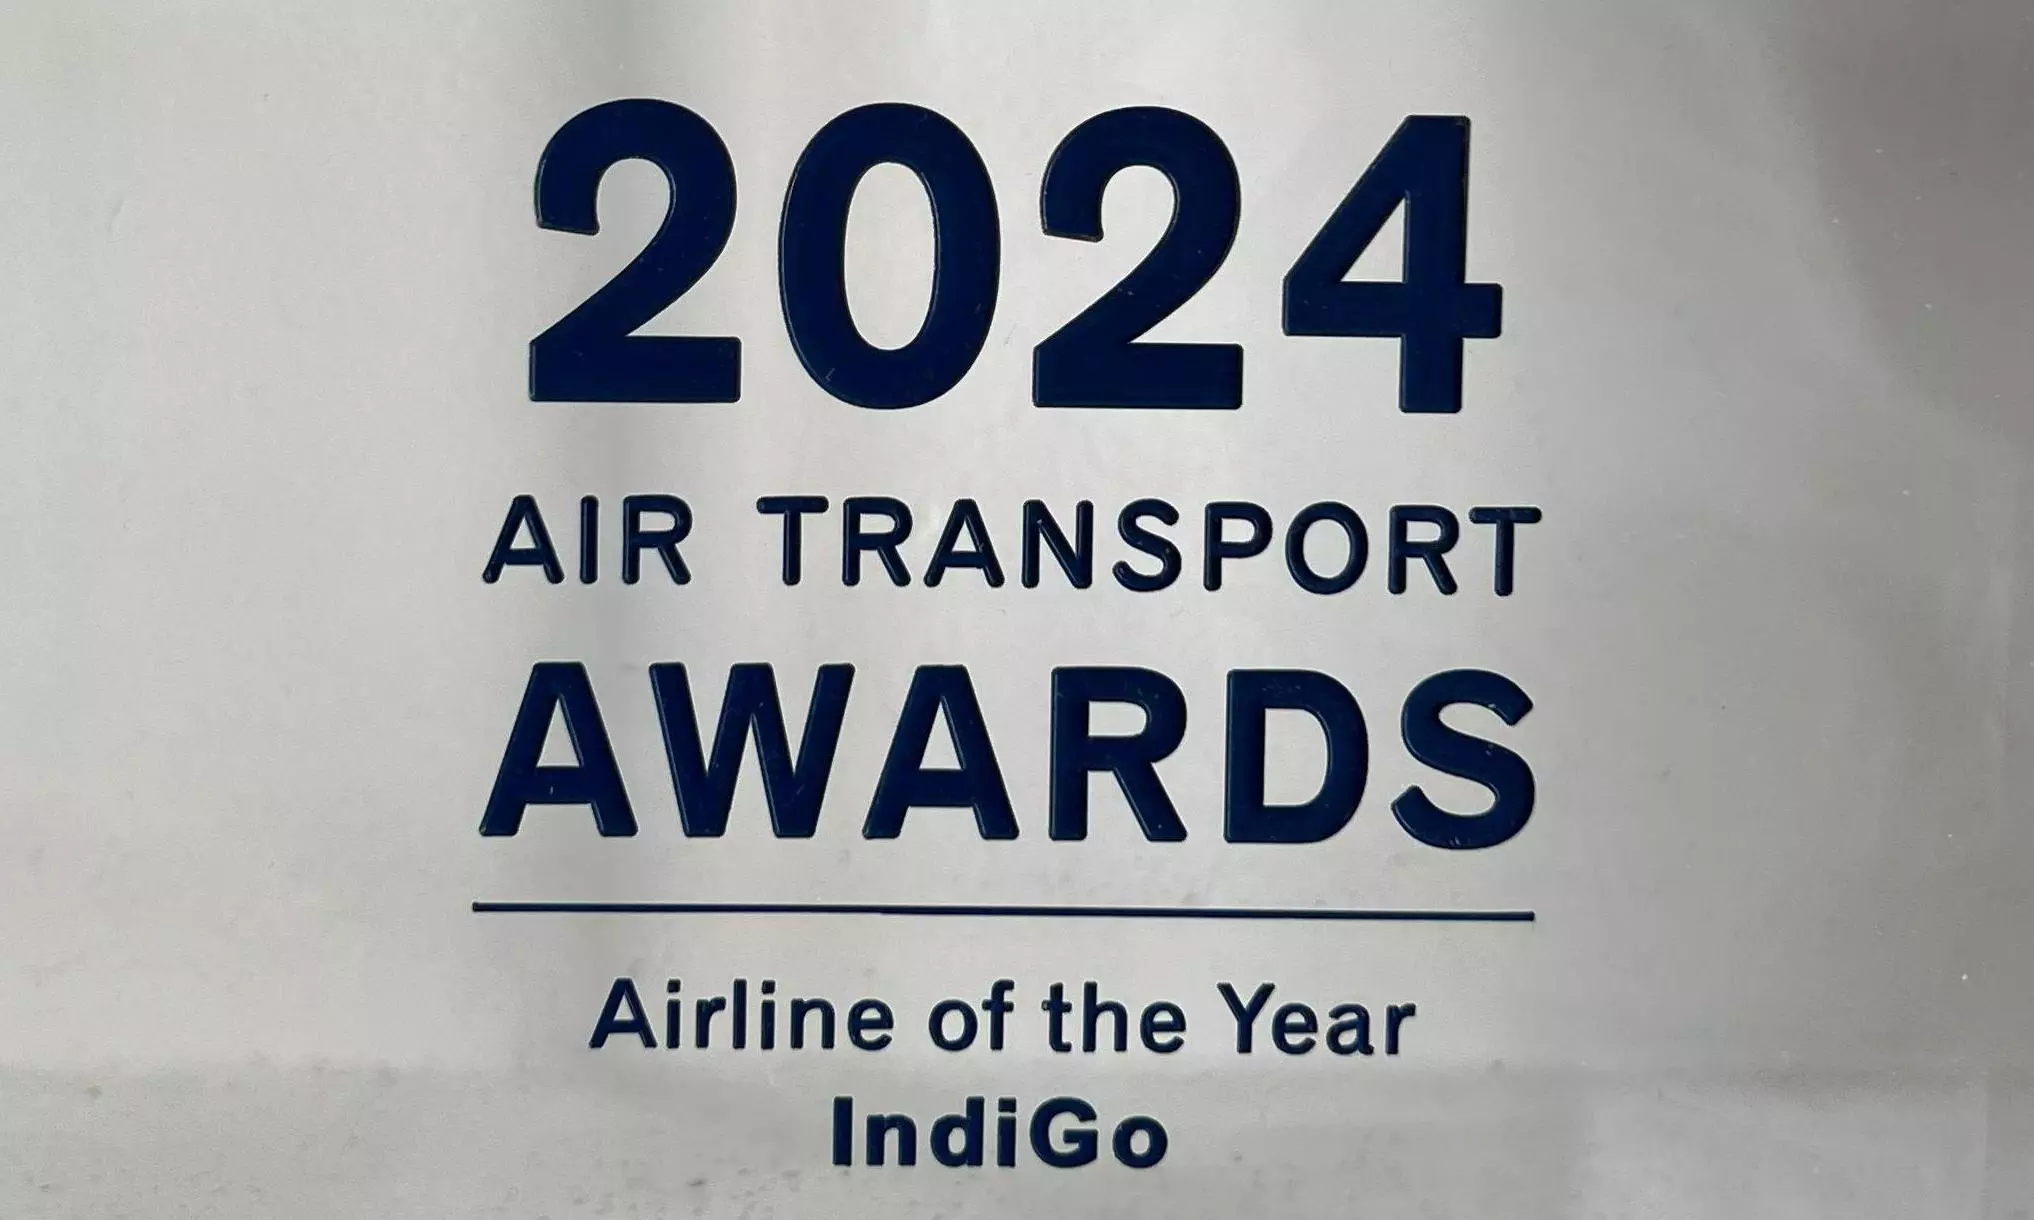 IndiGo wins Airline of the Year at Air Transport Awards 2024!